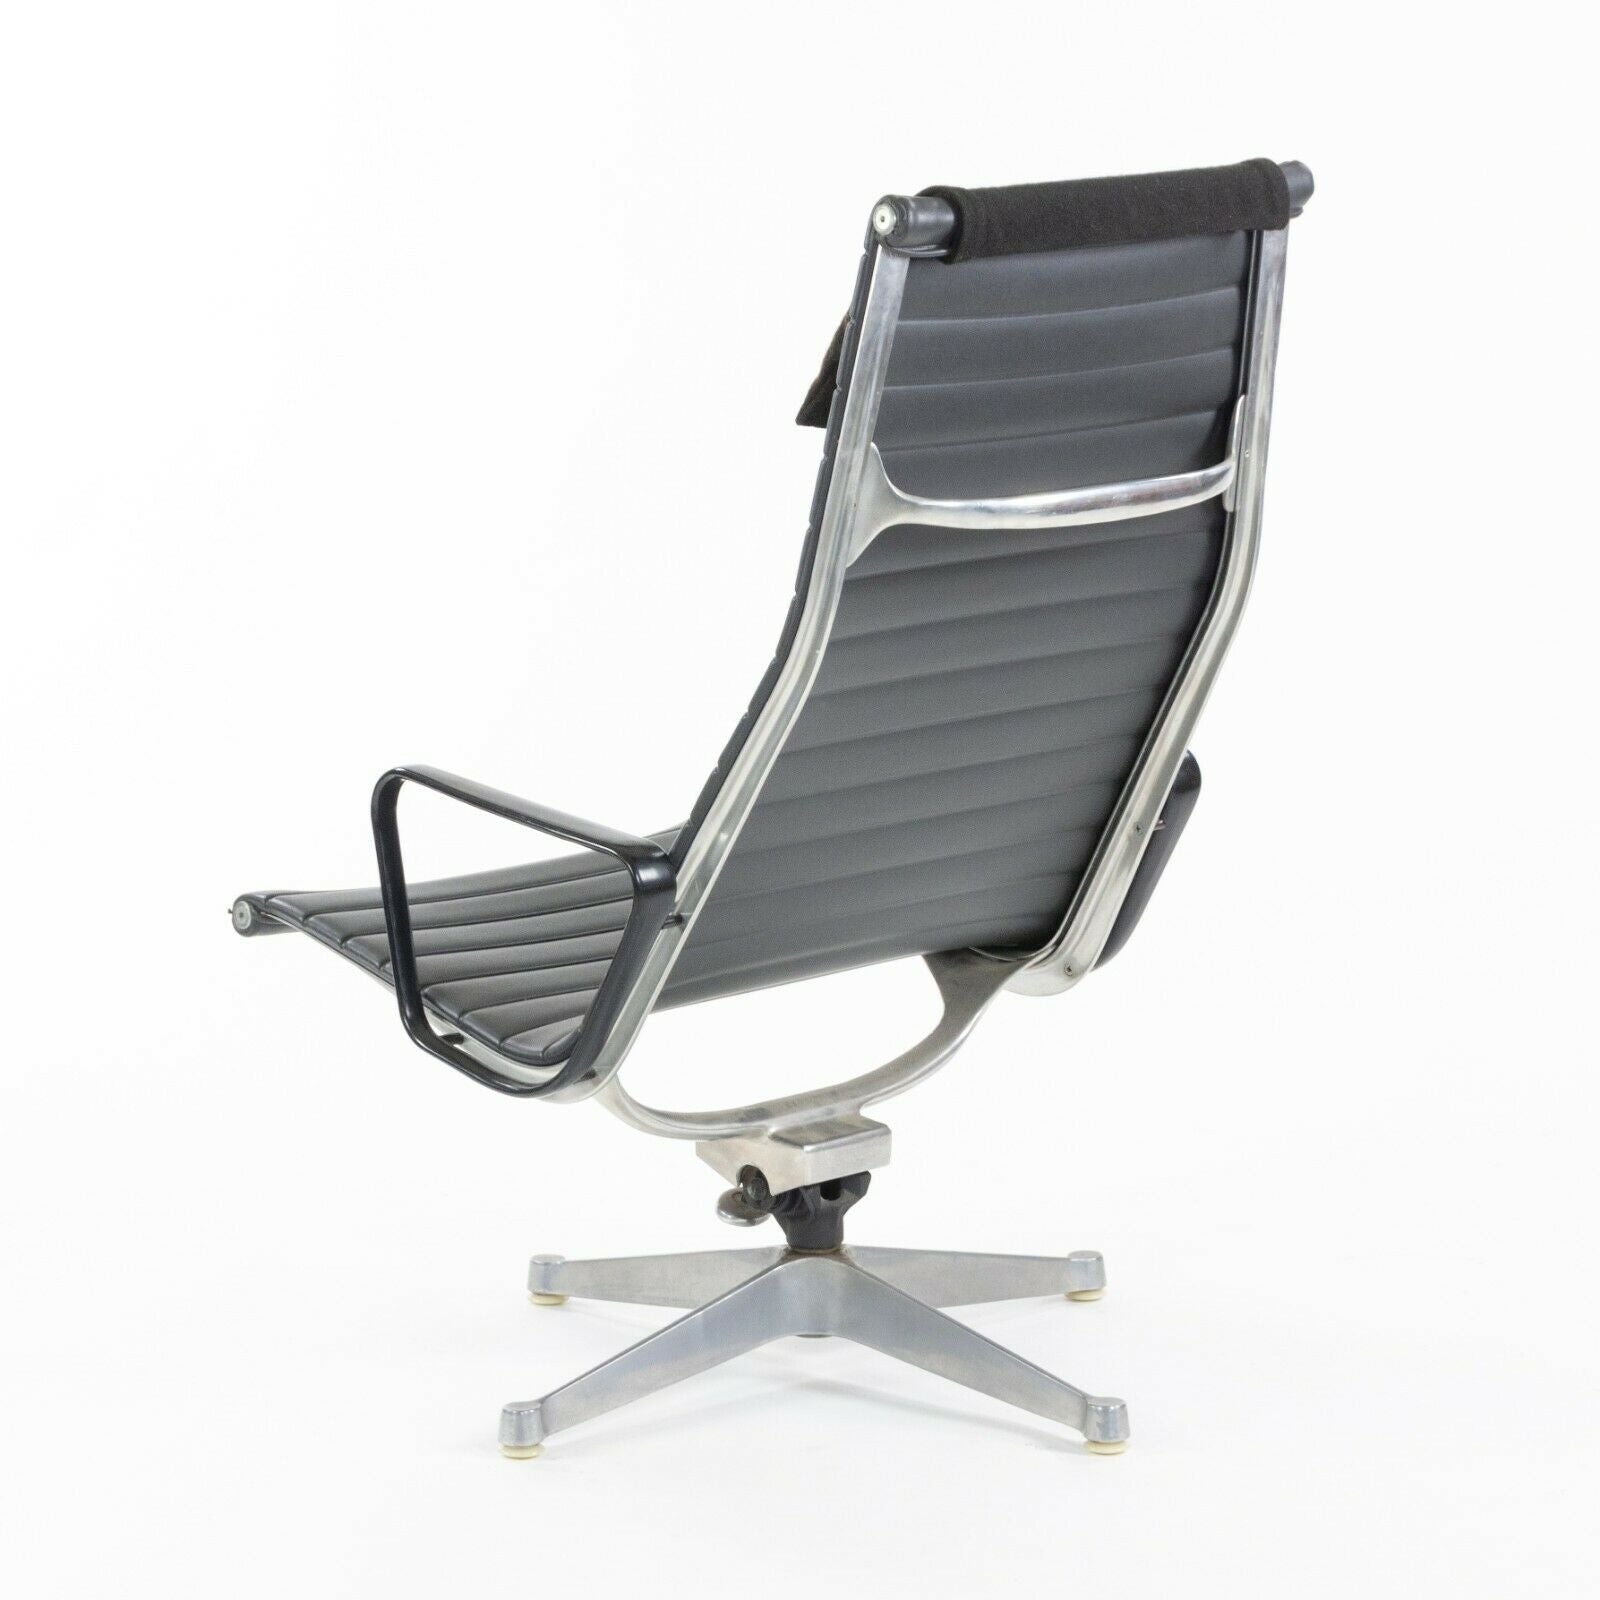 SOLD 1961 Pair of Herman Miller Eames Aluminum Group Lounge Chairs Charcoal Naugahyde